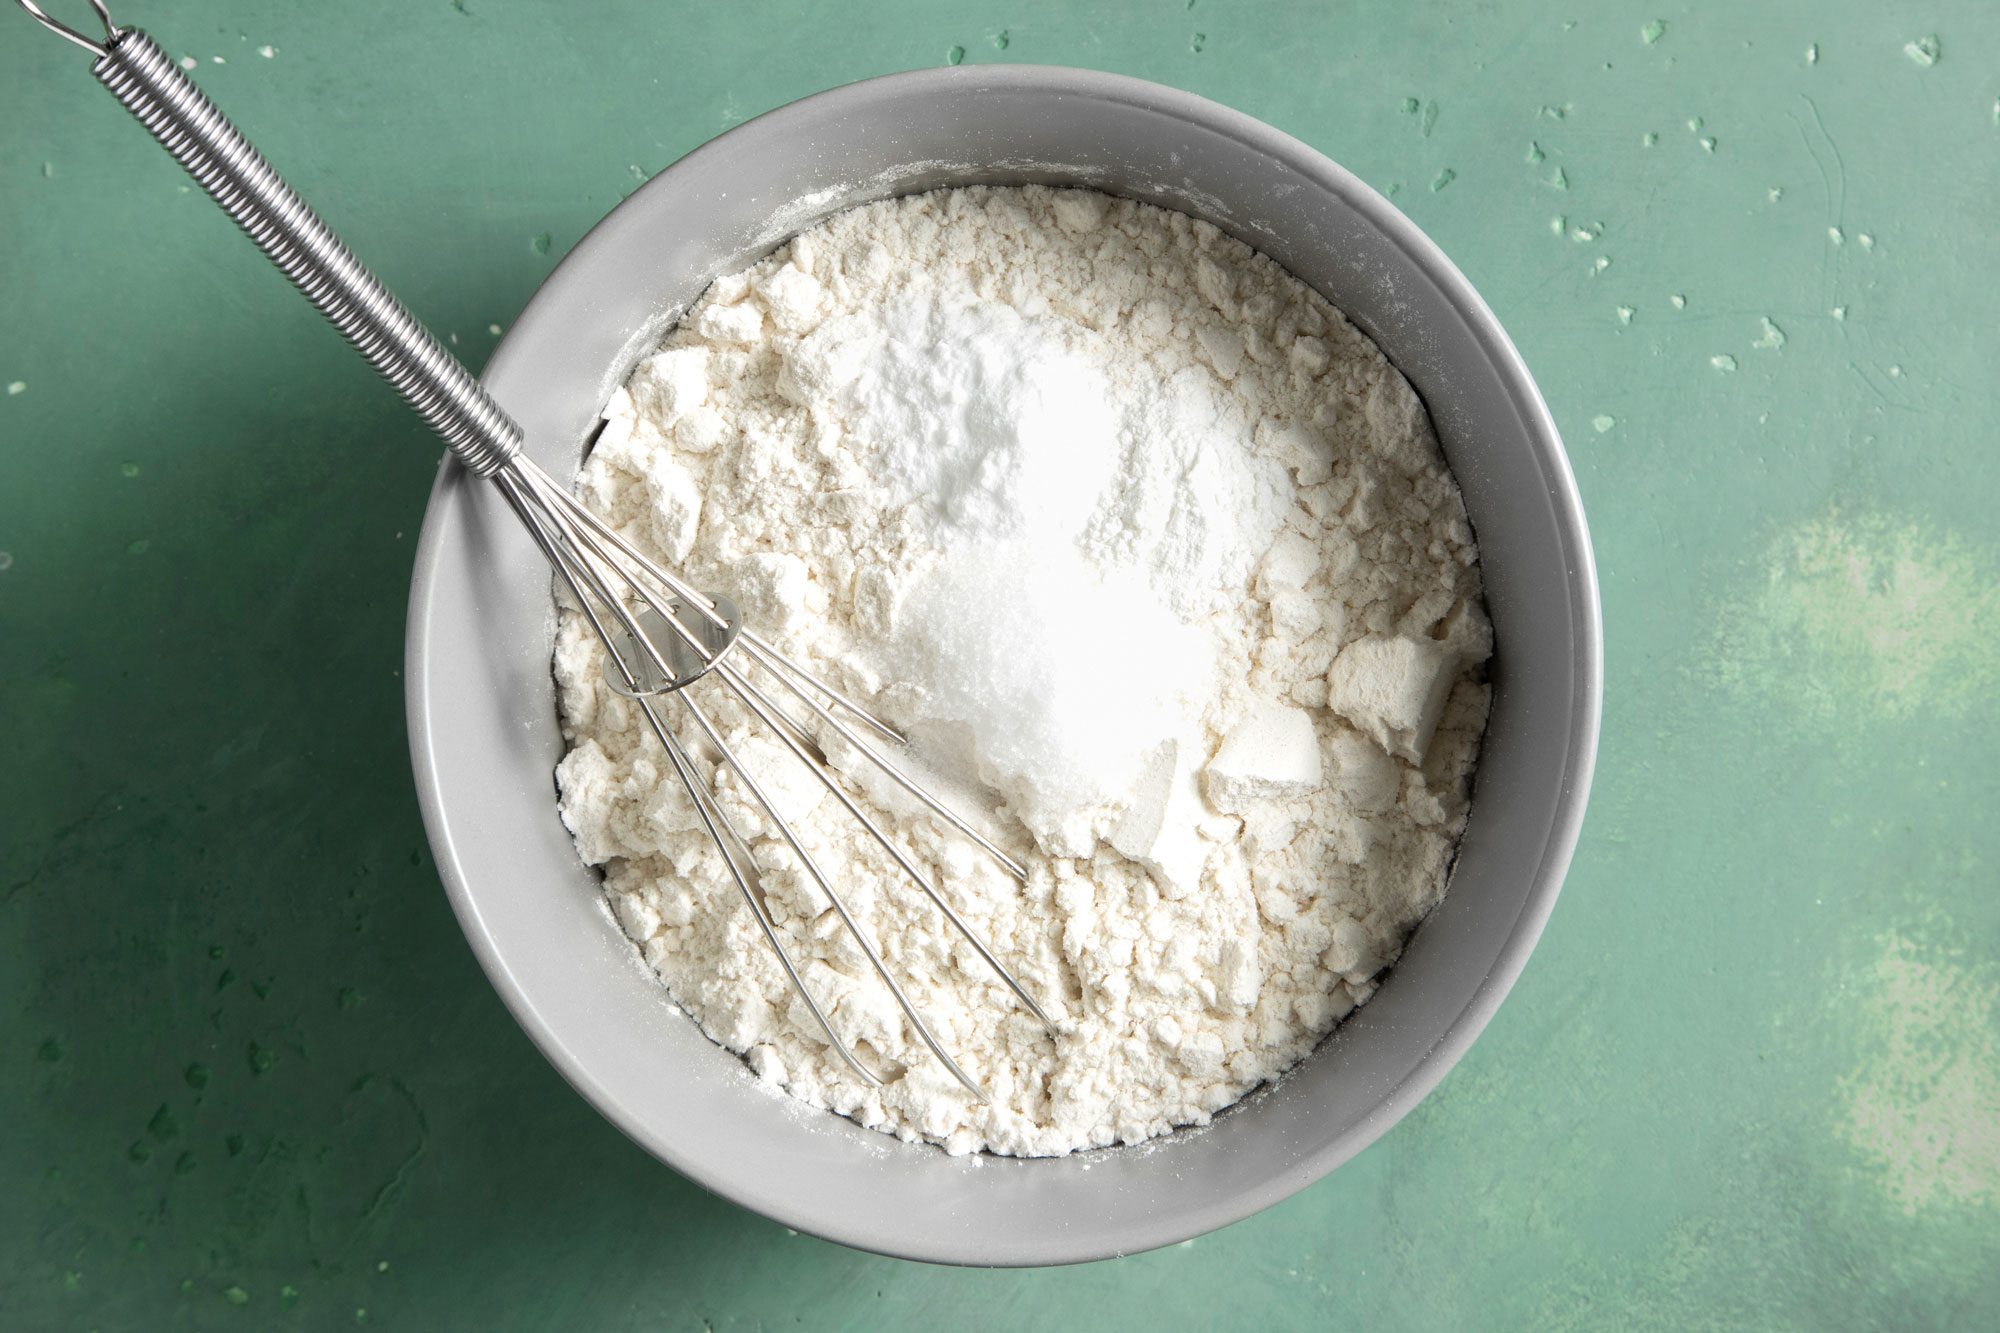 Whisk together the all-purpose flour, salt, baking soda and baking powder in other bowl